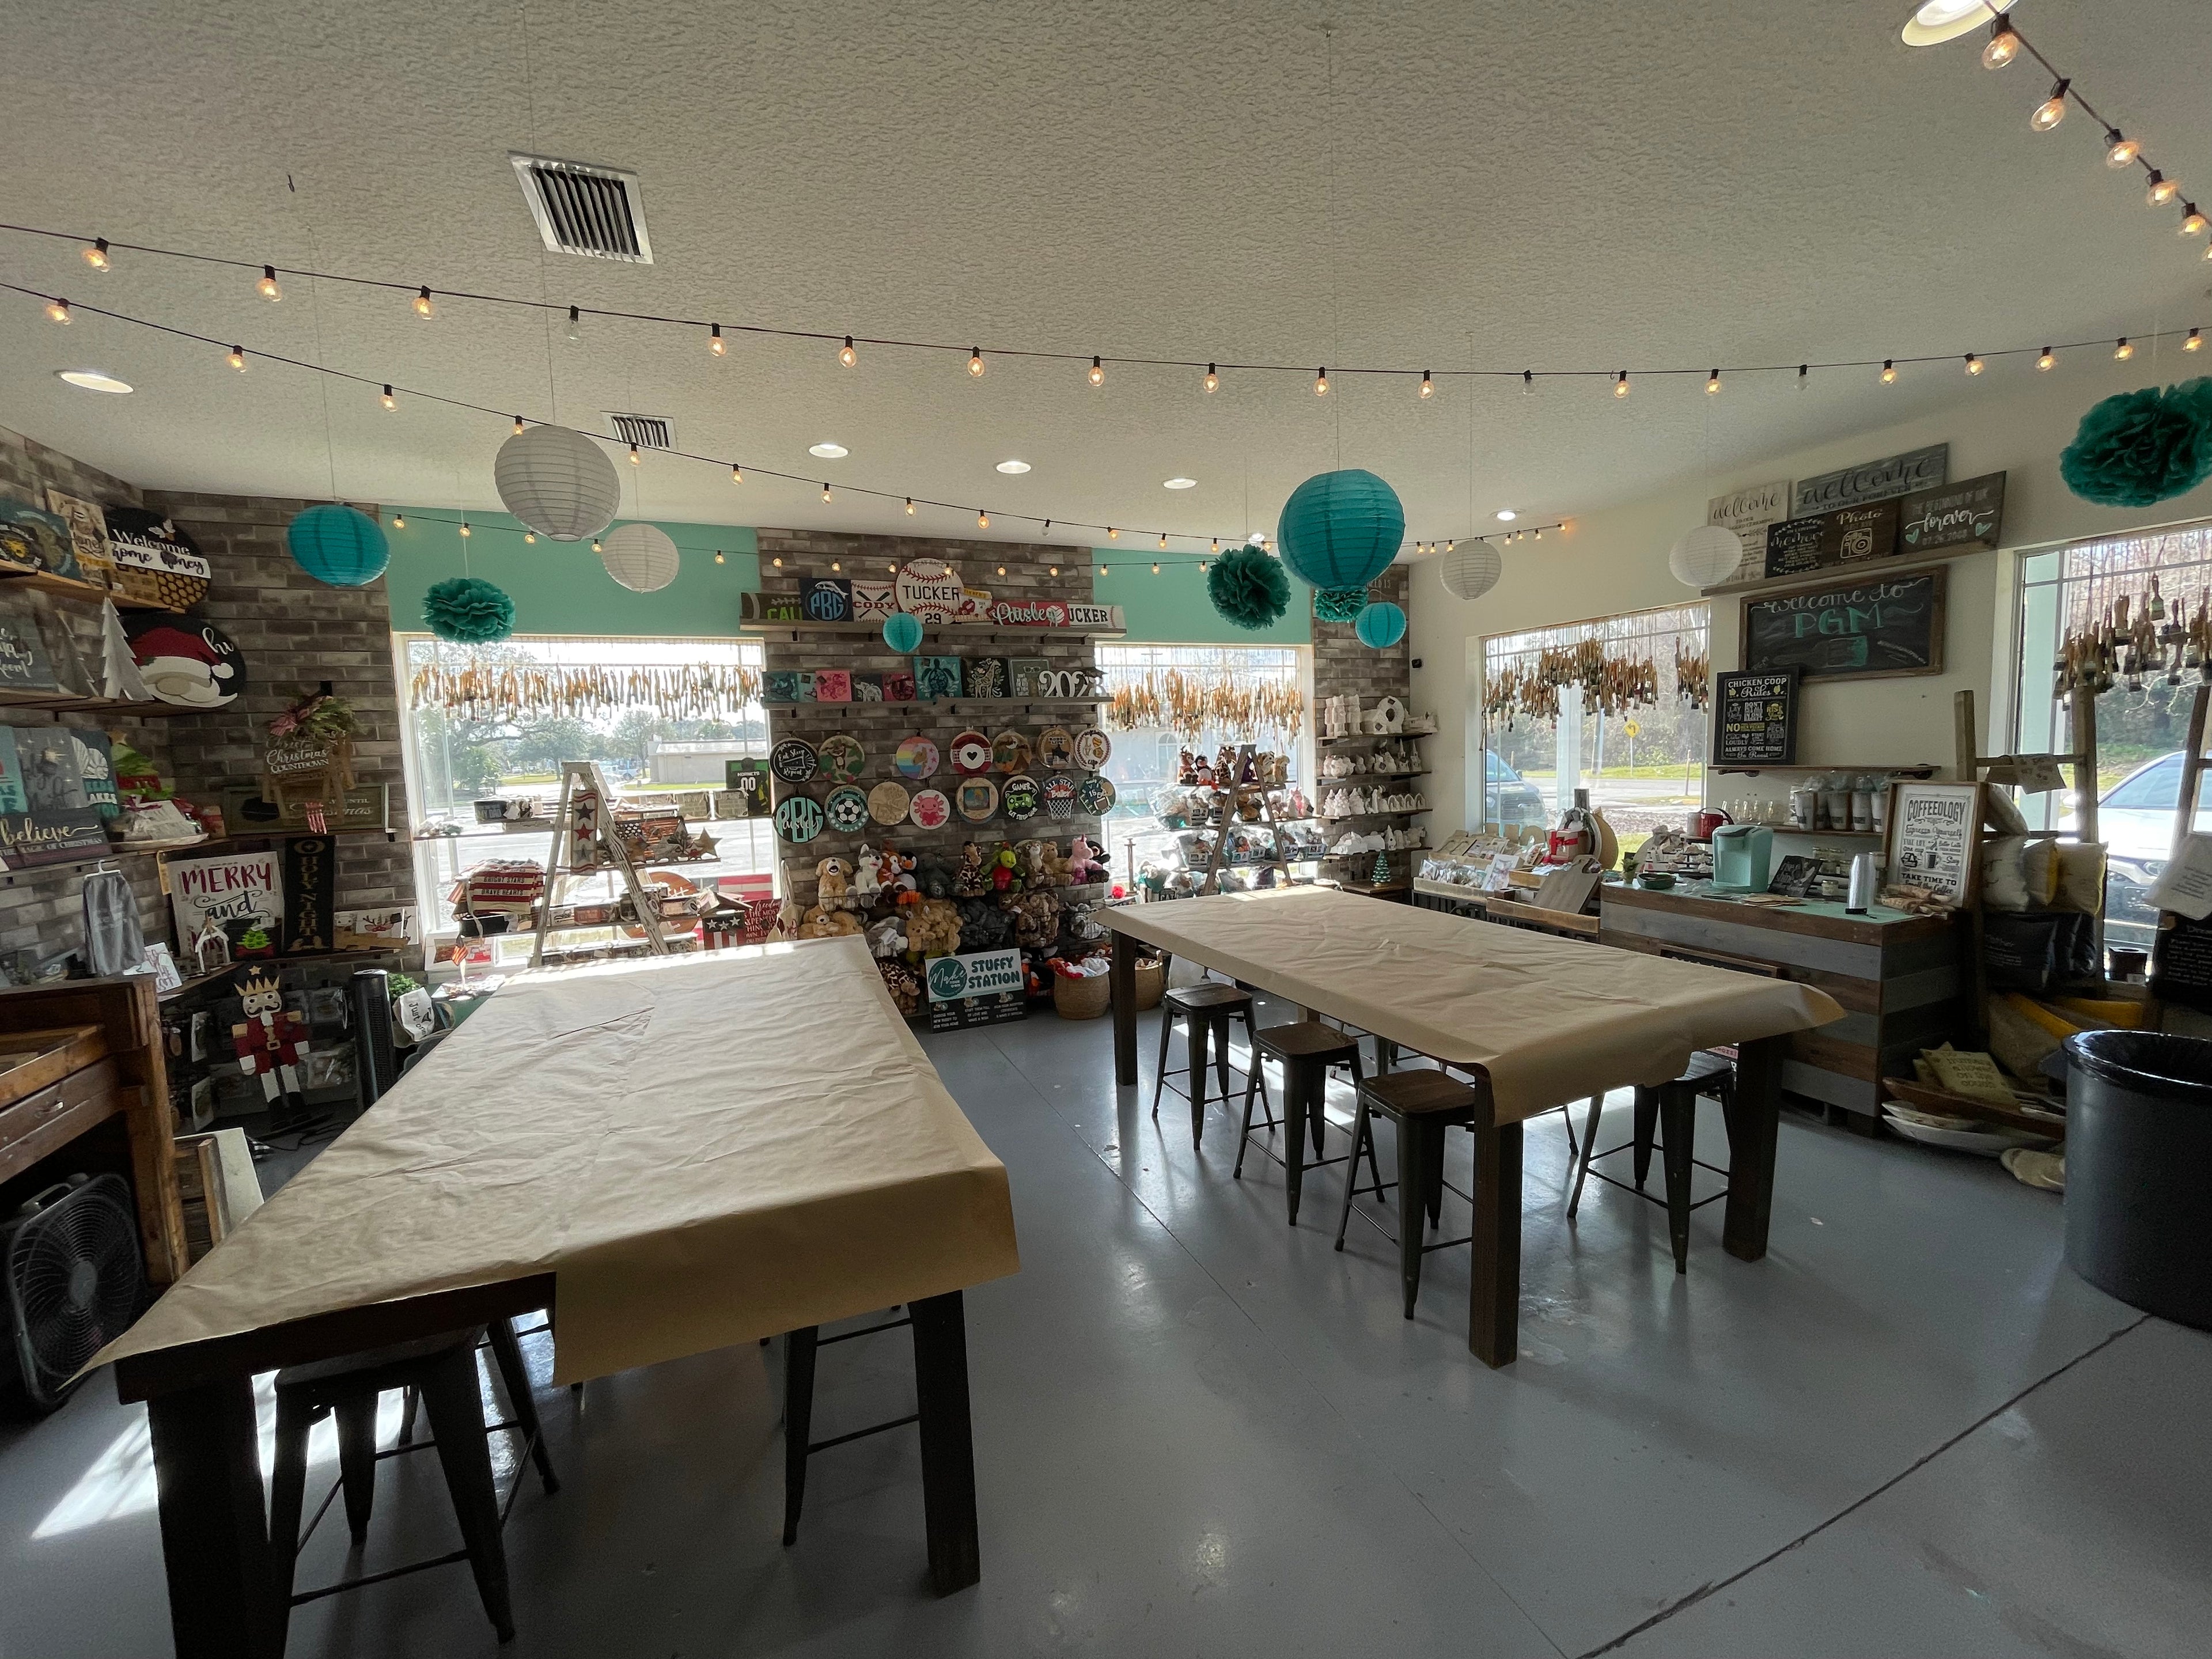 Private Party Room at Paisley Grace Makery in Fernandina Beach, Florida 